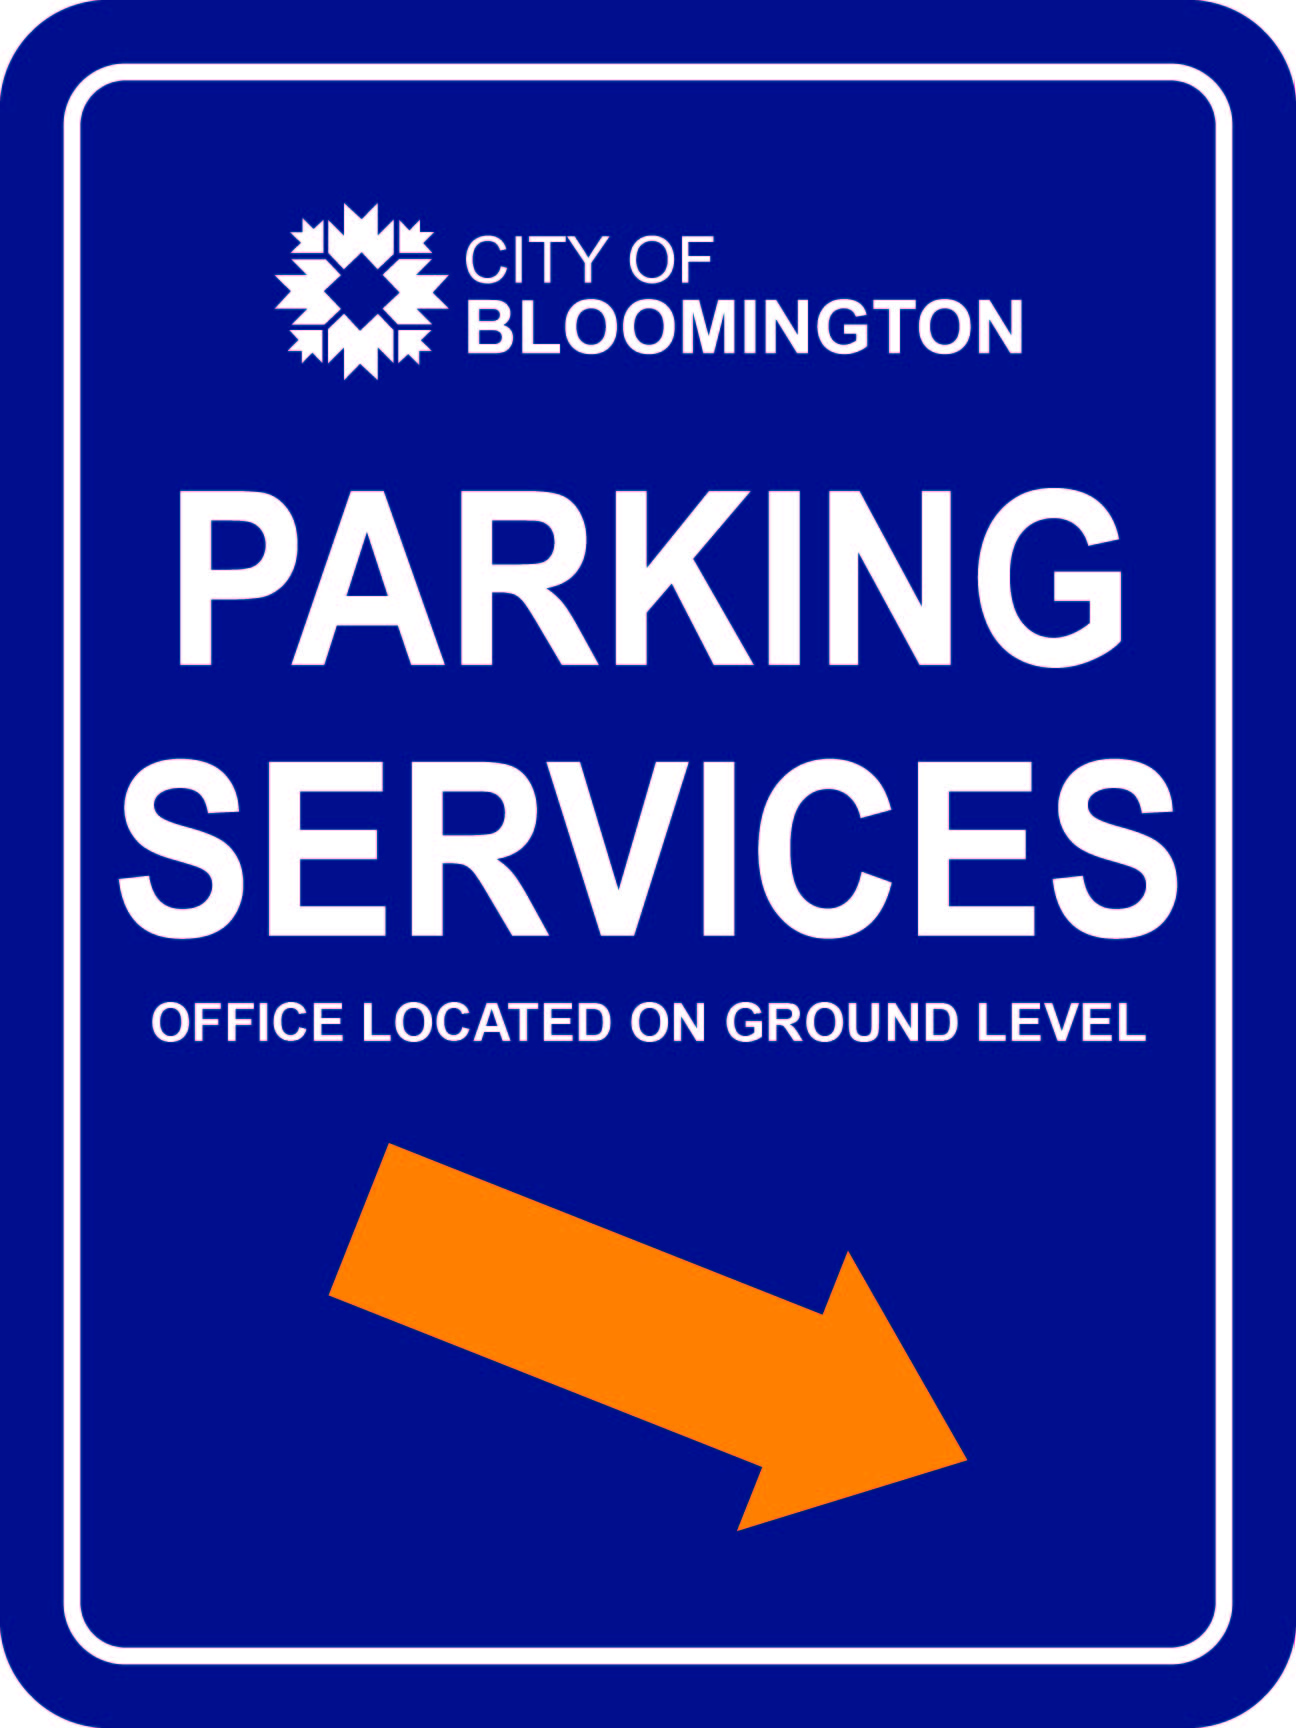 Signage from 4th street garage to Parking Office 